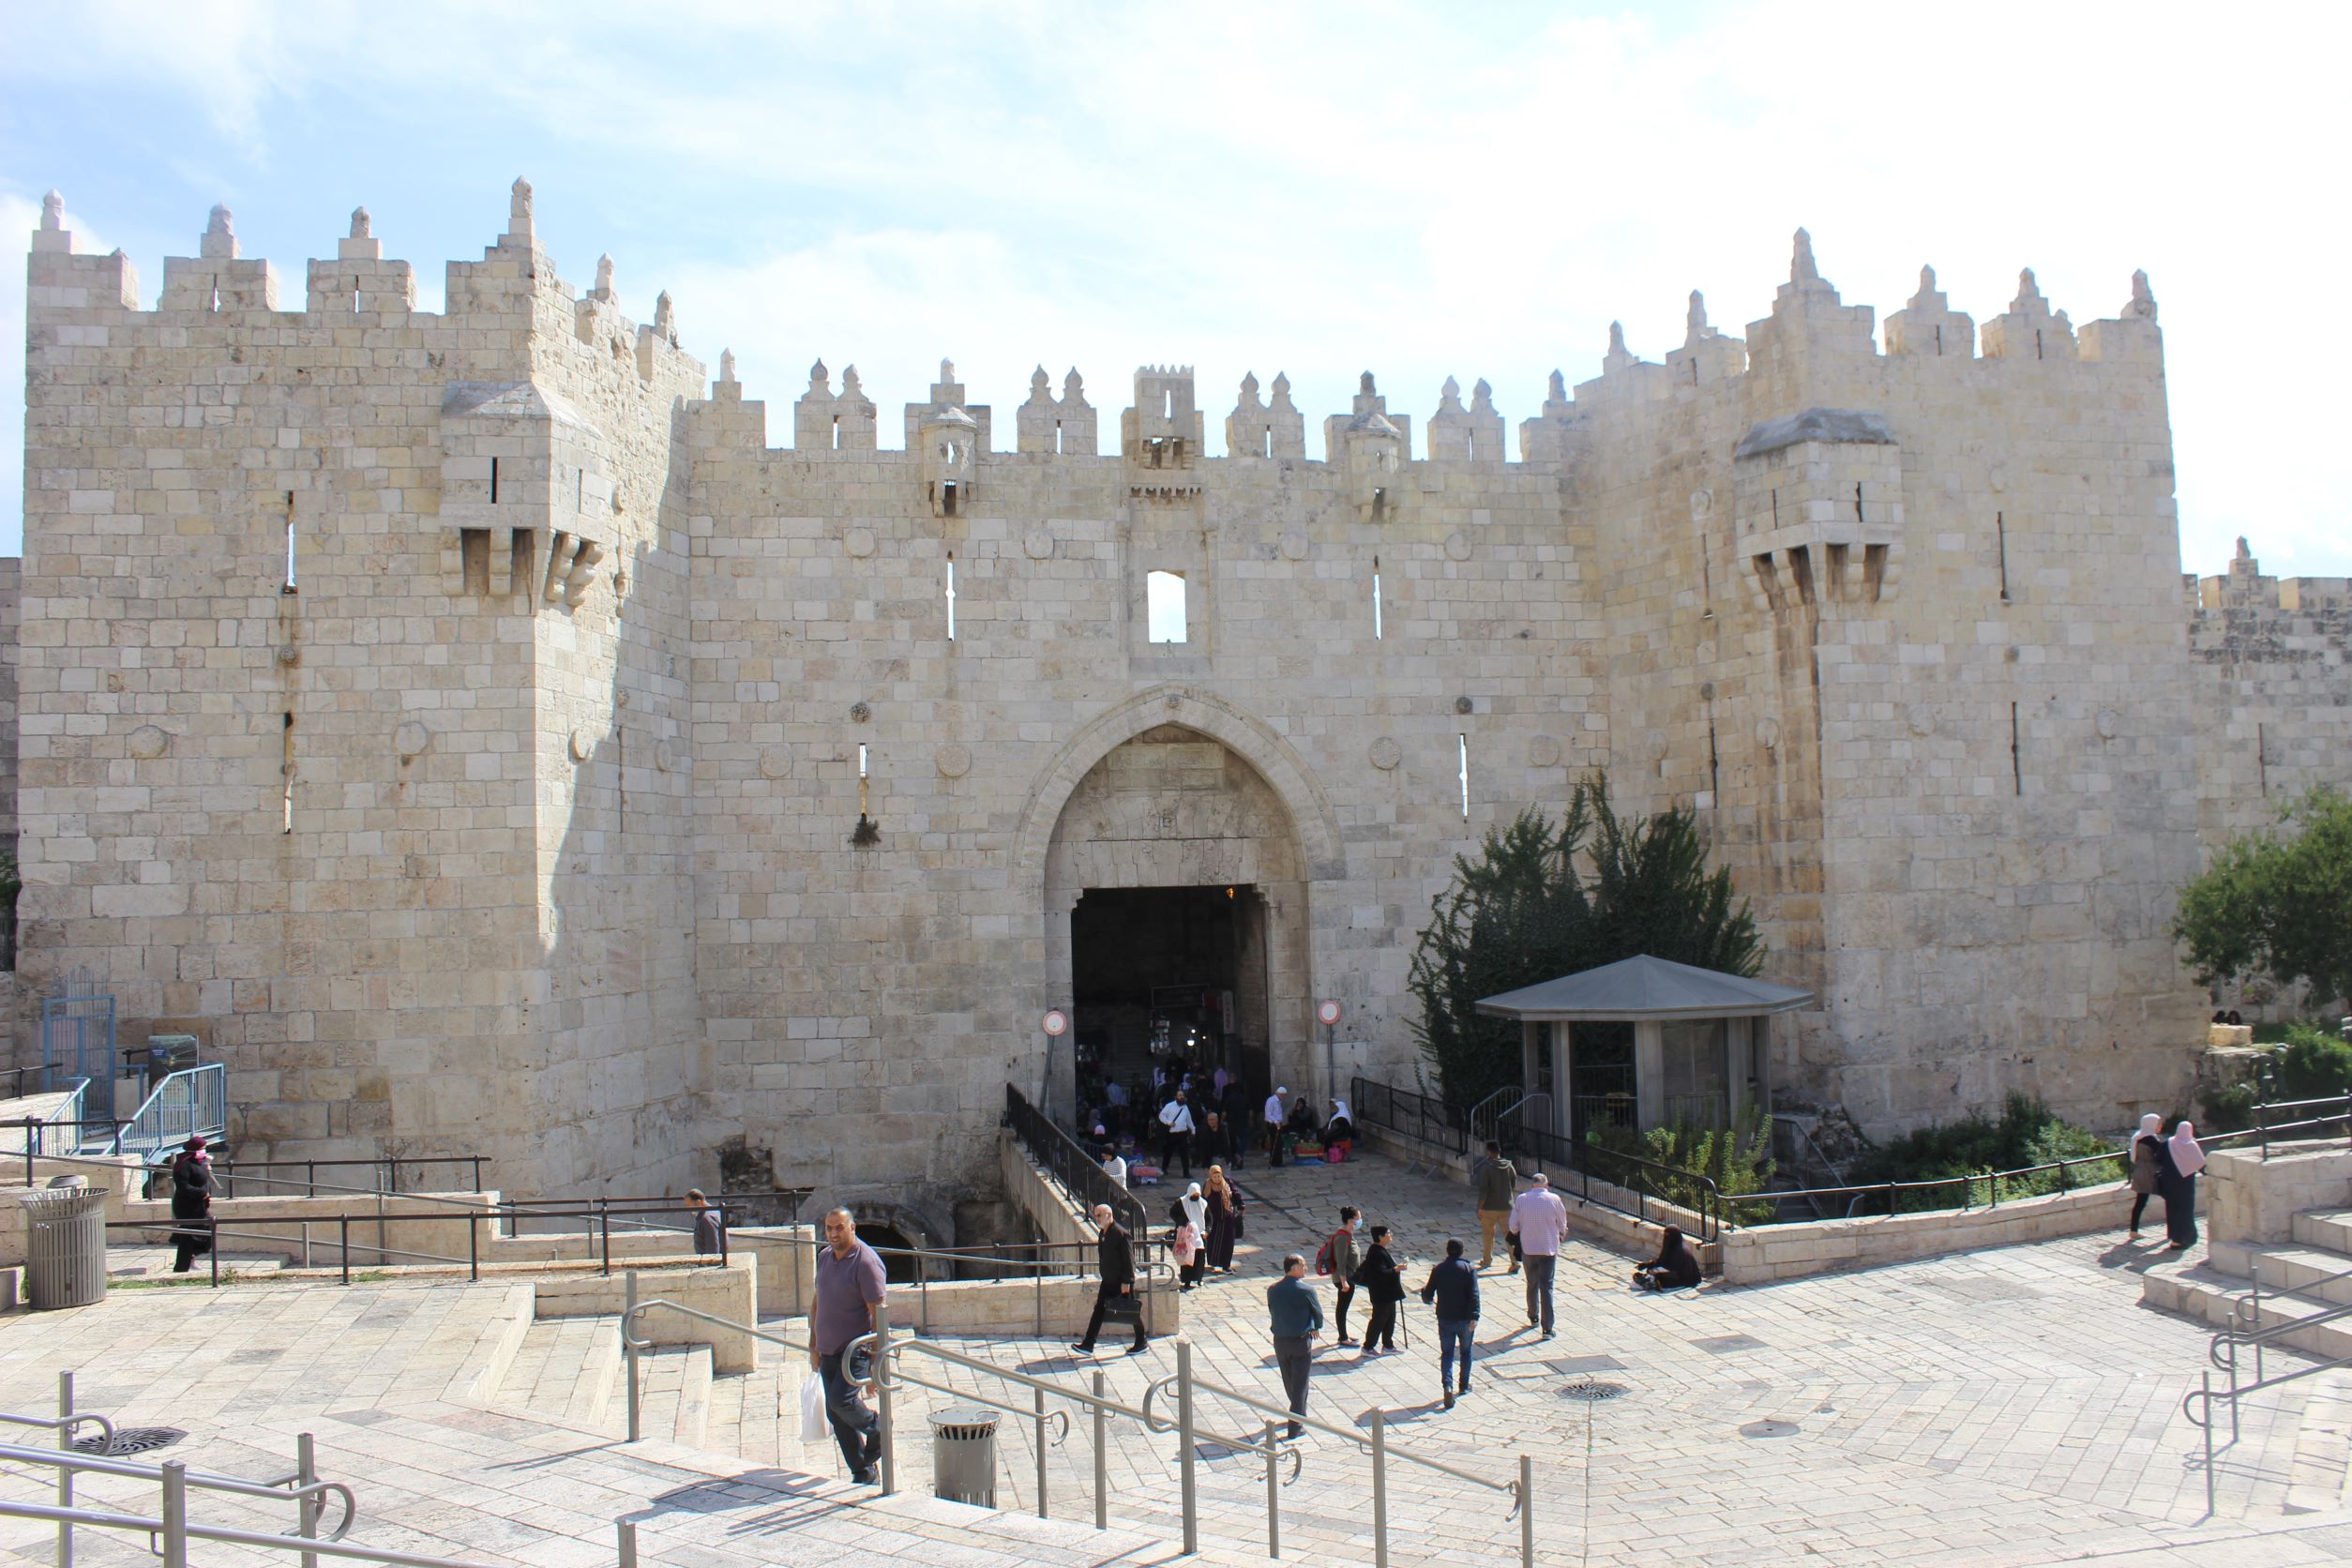 A general picture of Damascus Gate, one of the old city gates, after spraying the place for consecutive days with waste water (Aseel Jundi)